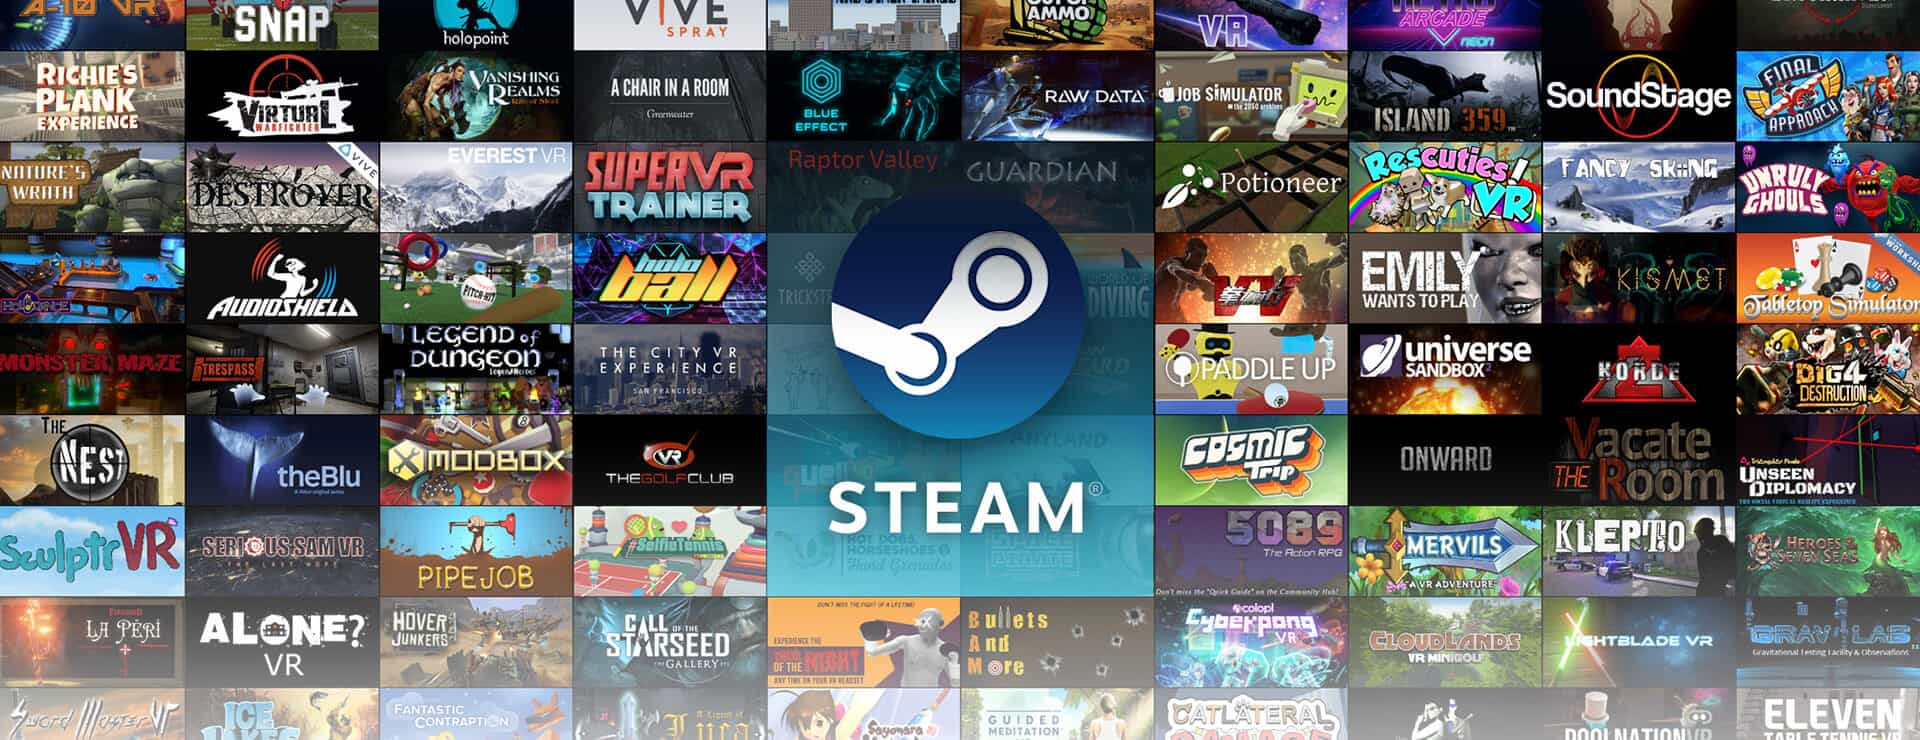 Here's a look at the best-selling Steam games for 2017 - OnMSFT.com - January 3, 2018